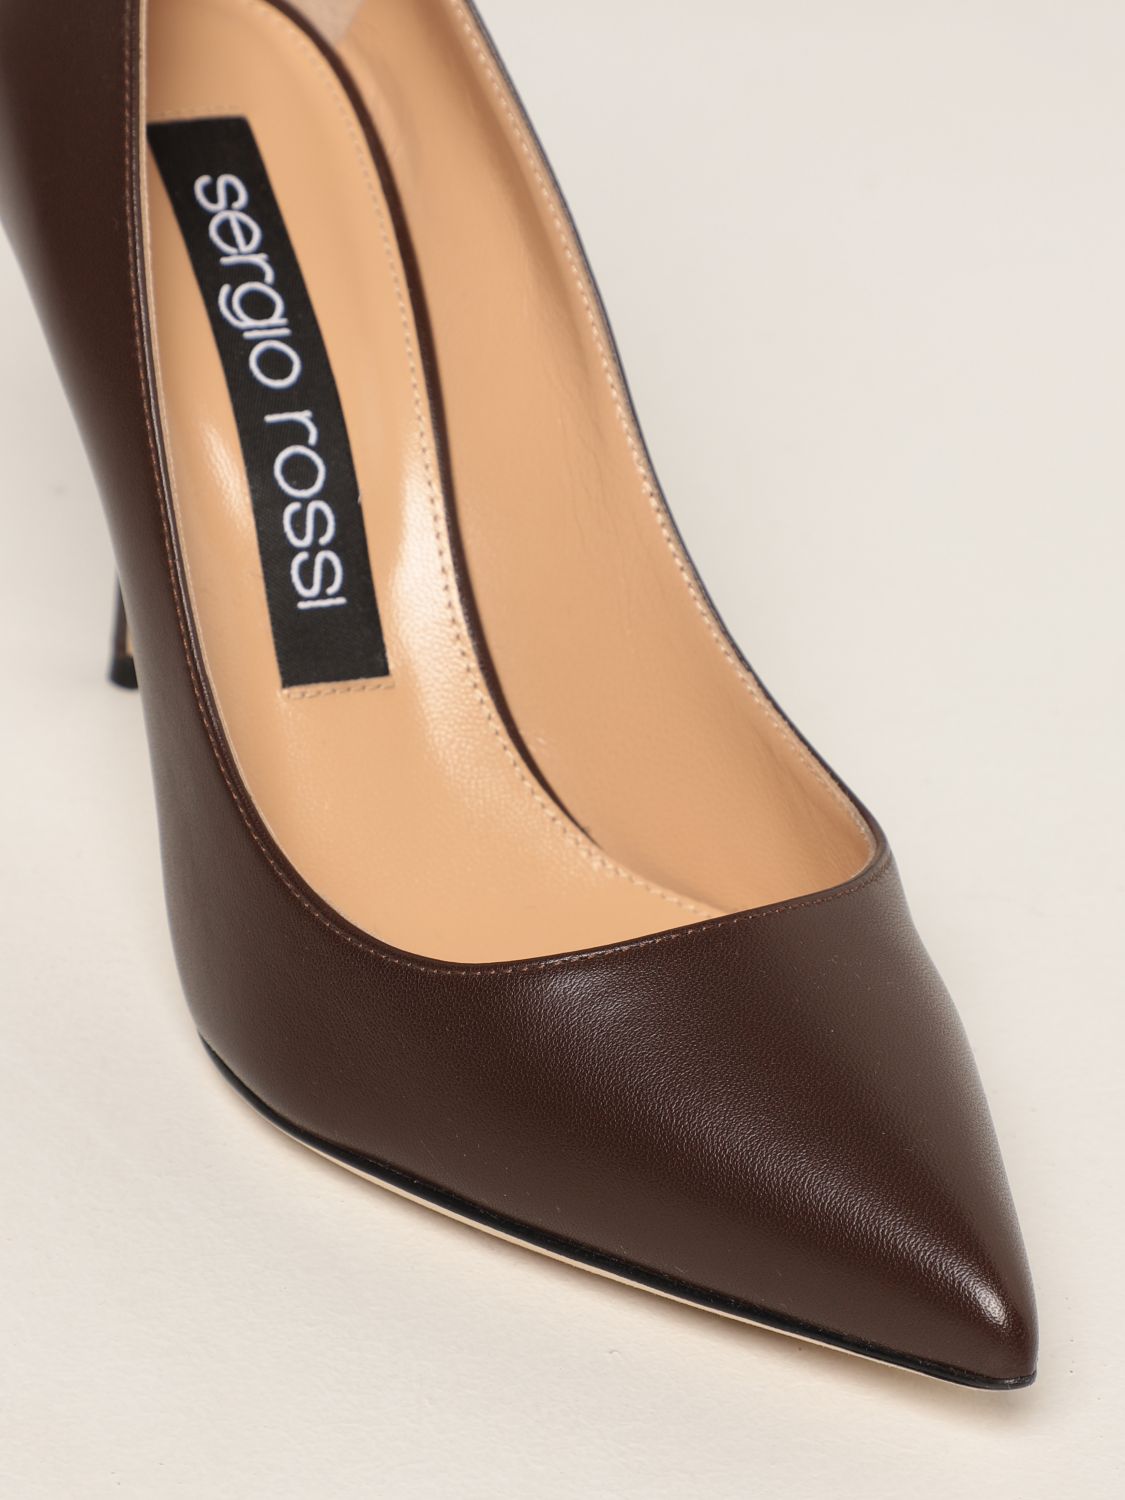 Court shoes Sergio Rossi: Sergio Rossi court shoes for women brown 4